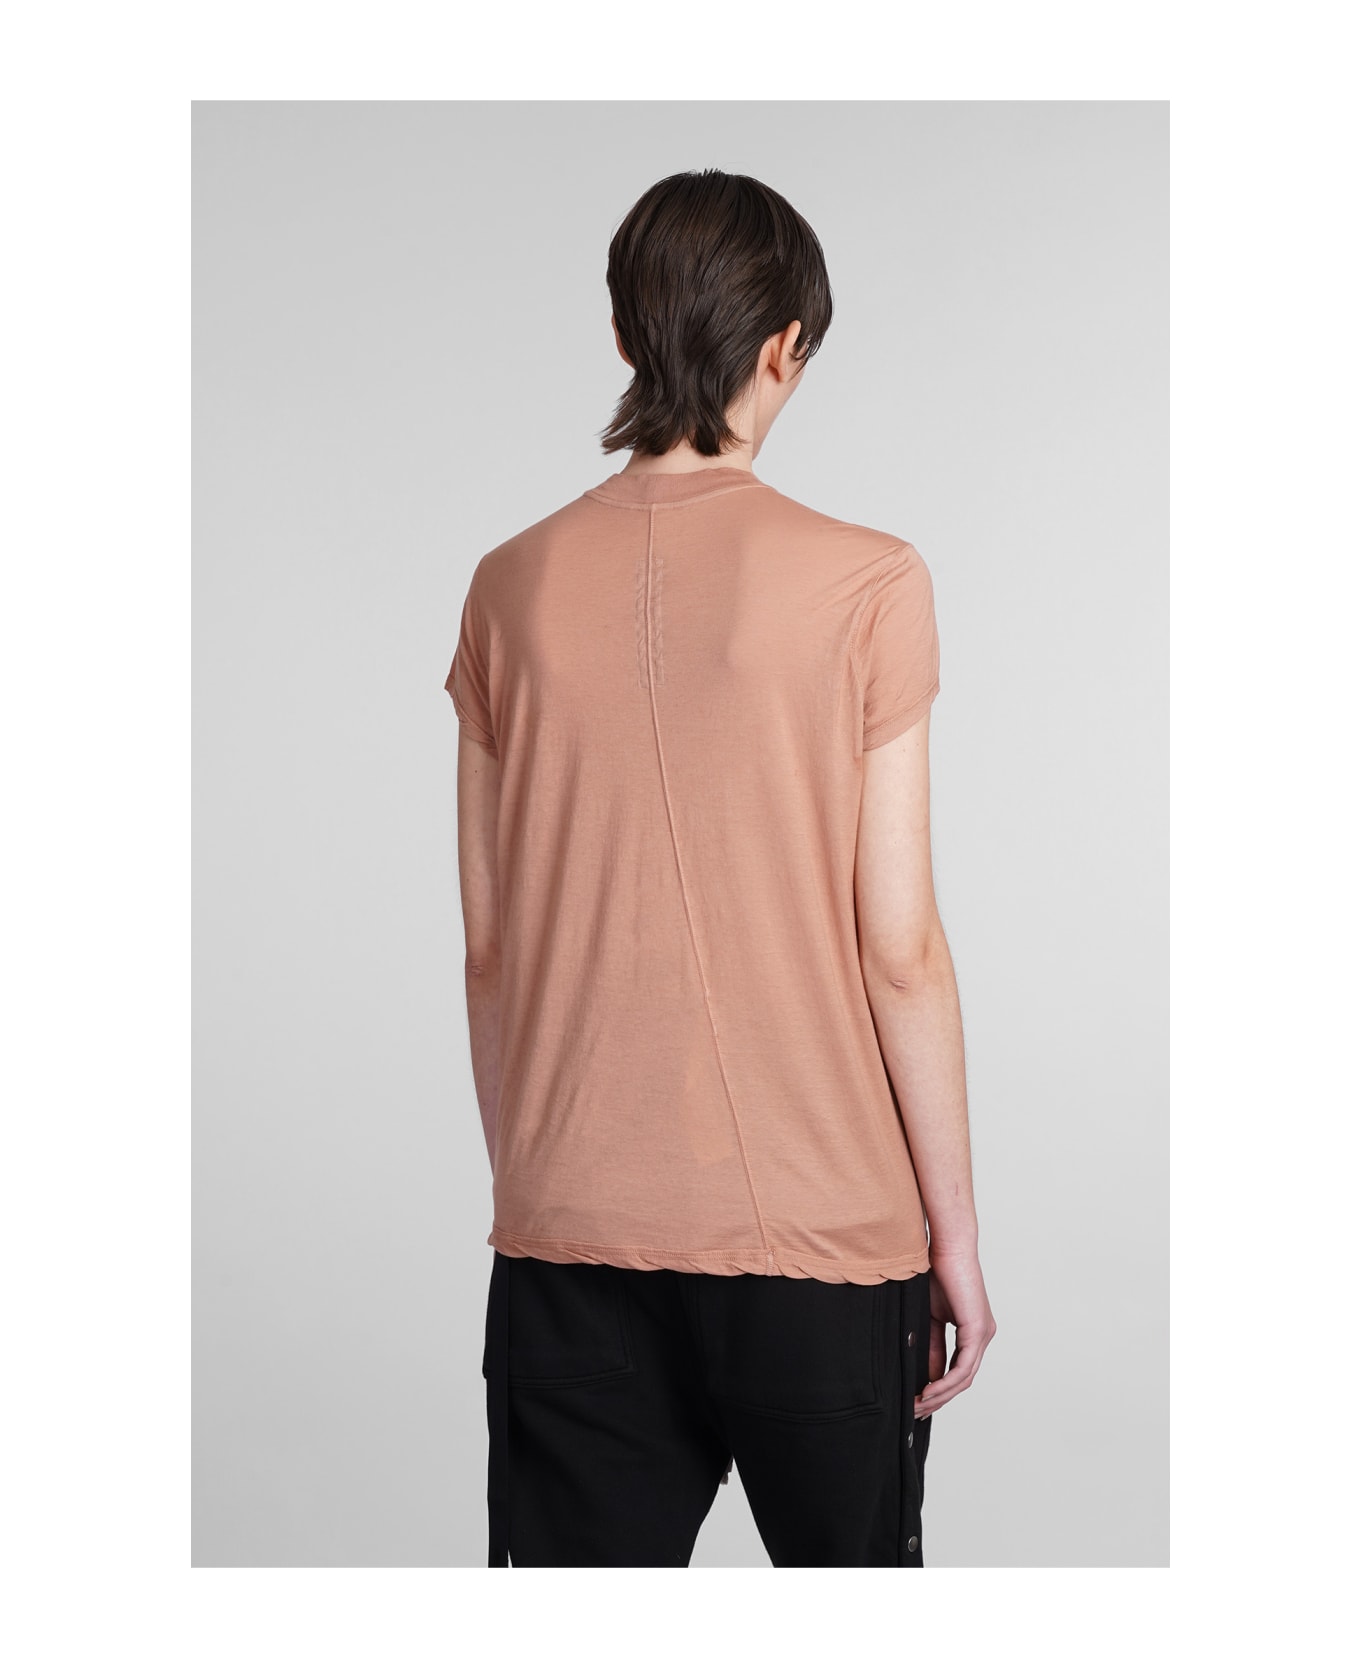 DRKSHDW Small Level T T-shirt In Rose-pink Cotton - rose-pink